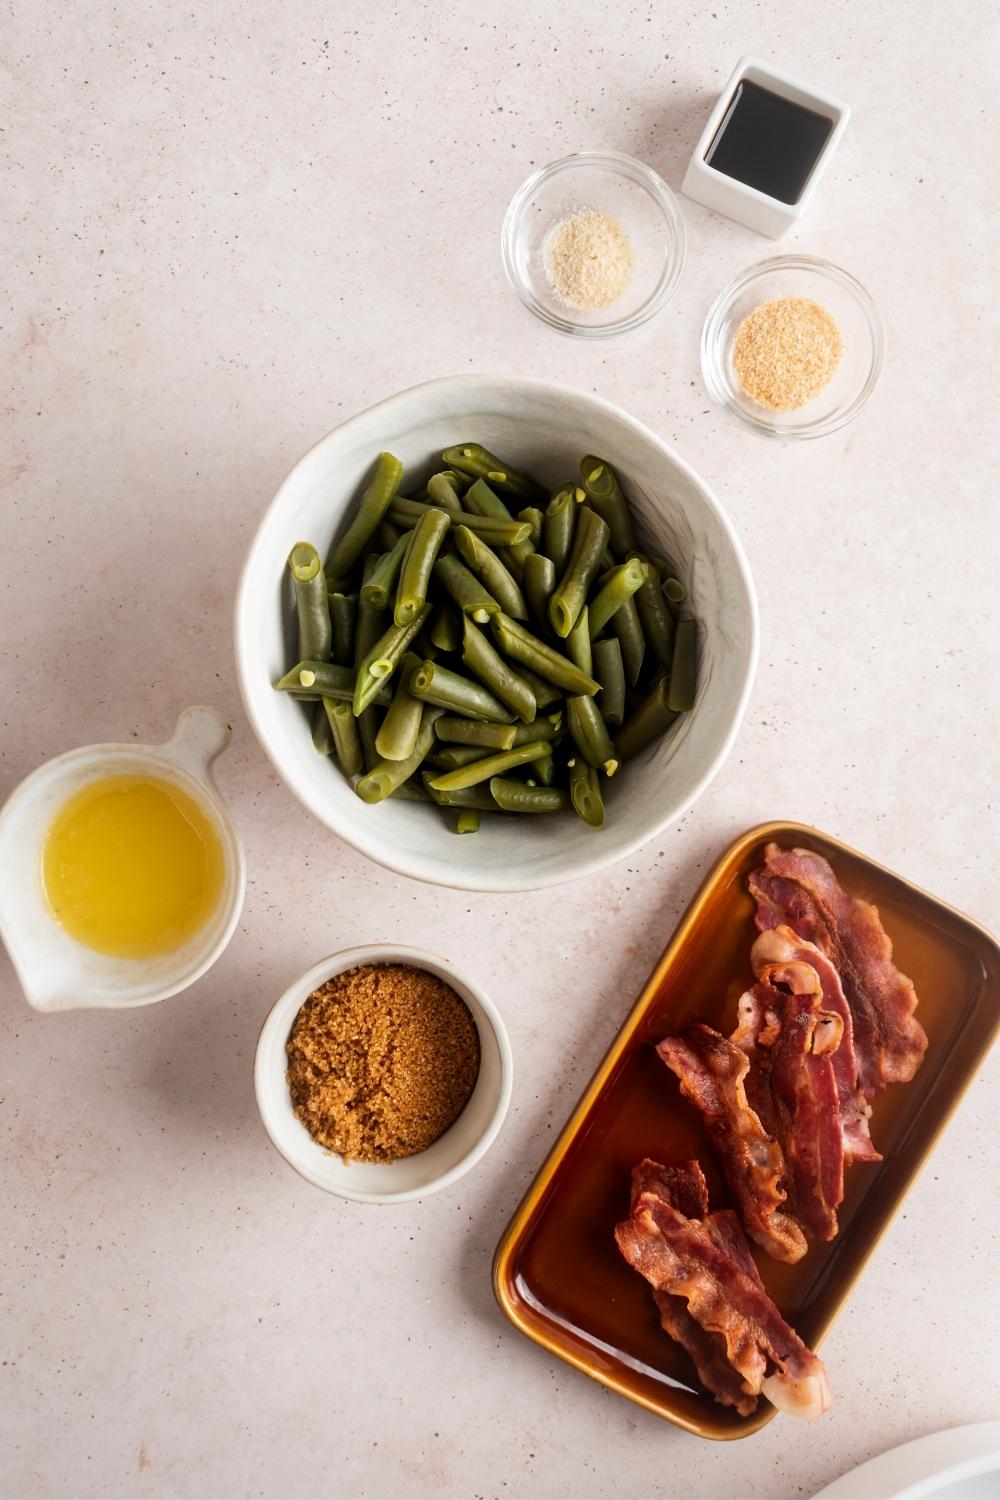 A bowl of green beans, a plate of bacon, bowl brown sugar, both melted butter, bowl garlic powder, bowl of onion powder, and evolve tamari sauce on the white counter.